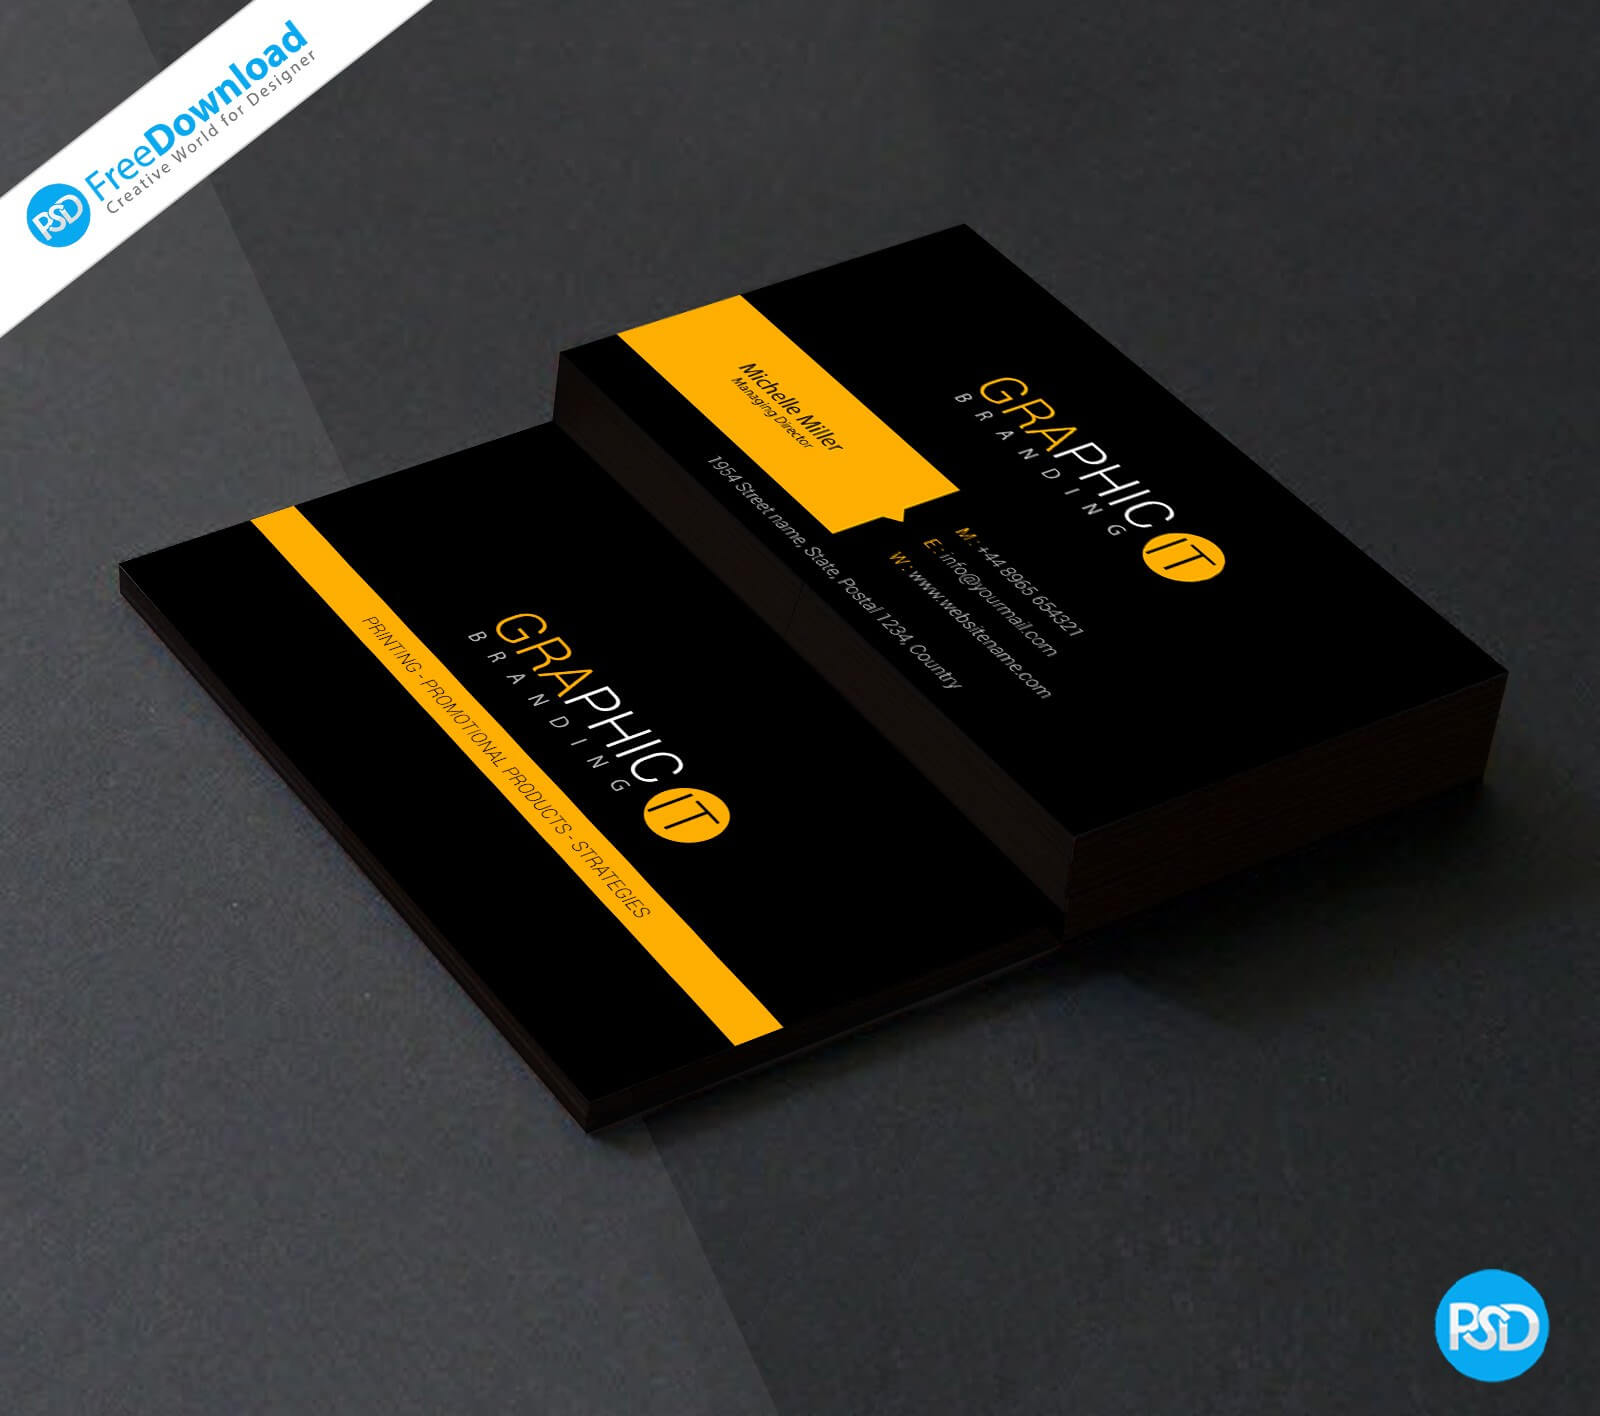 010 Blank Business Card Template Photoshop Free Download Throughout Name Card Template Photoshop